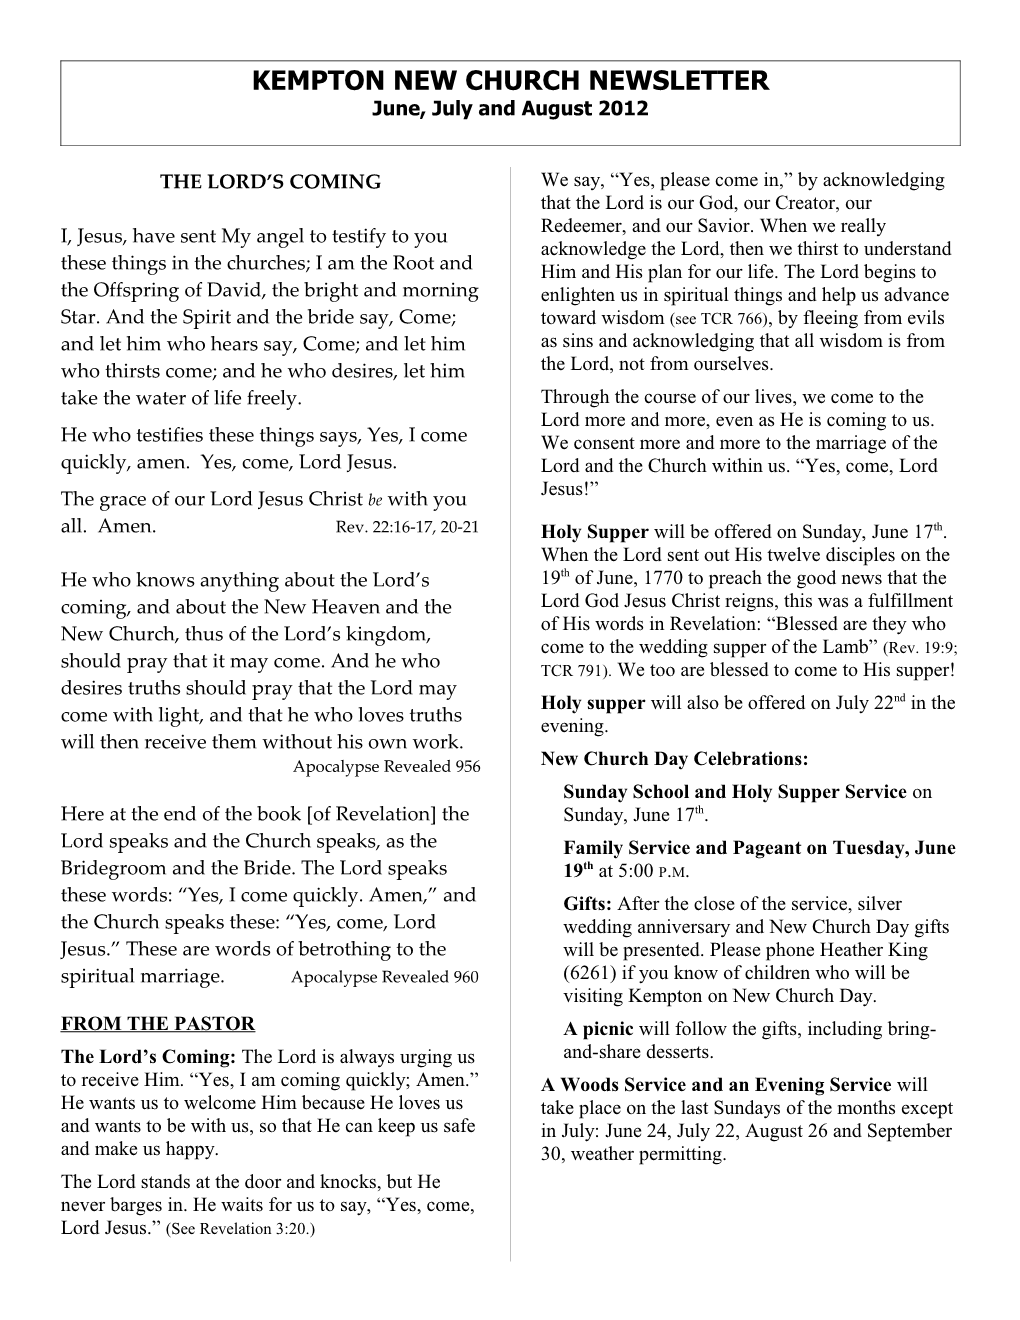 KEMPTON NEW CHURCH NEWSLETTER, June, July and August 2012 Page 3